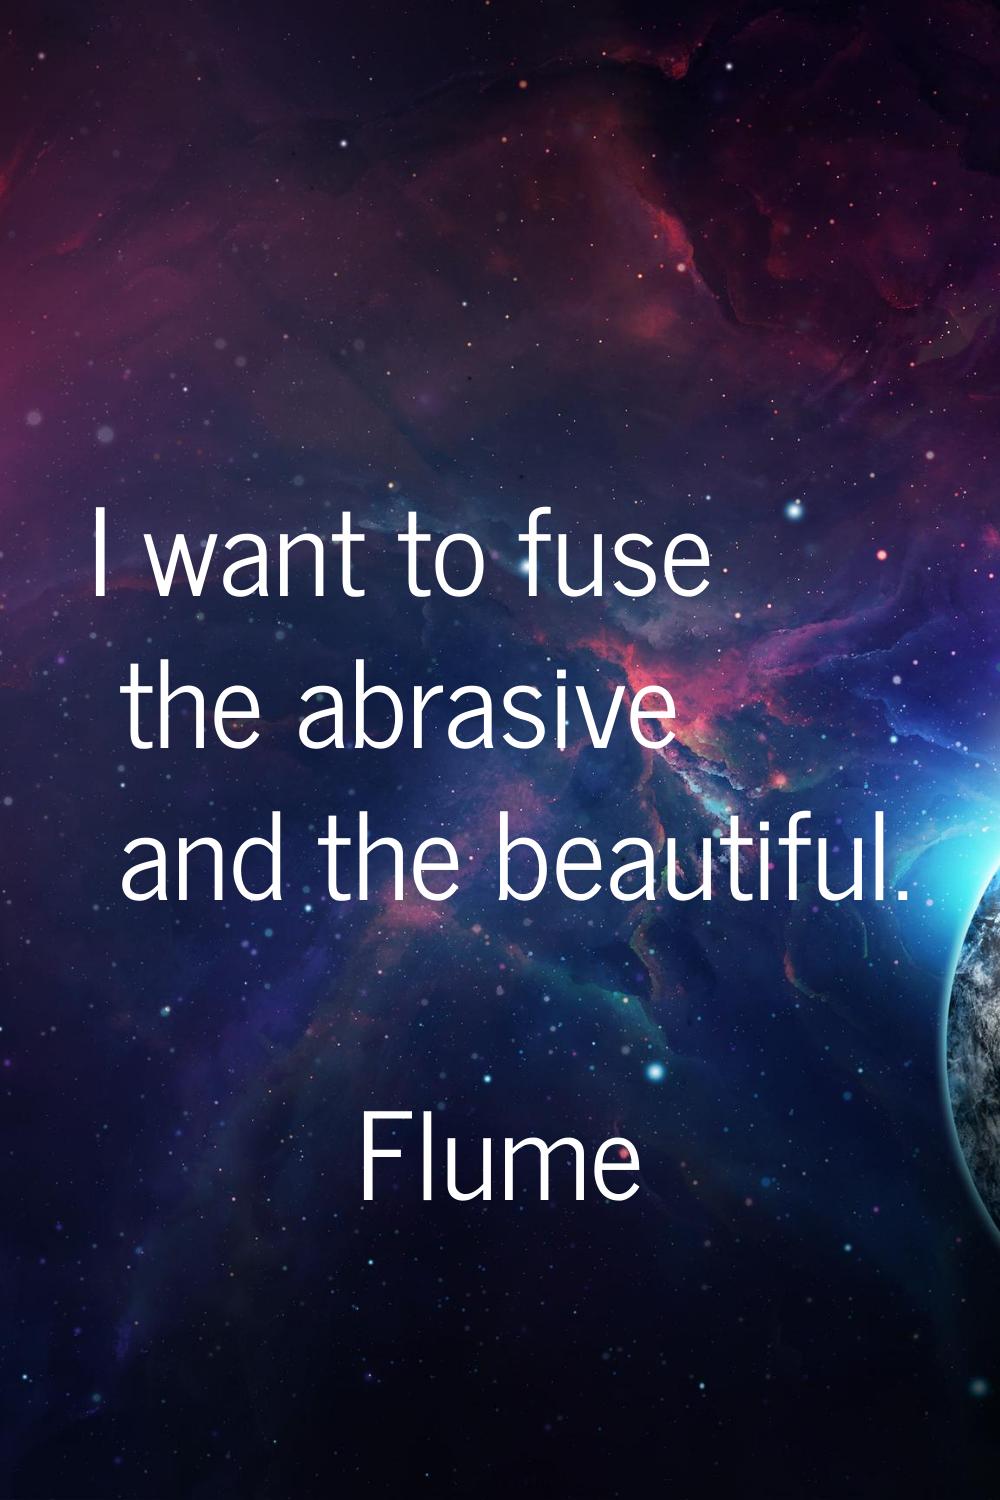 I want to fuse the abrasive and the beautiful.